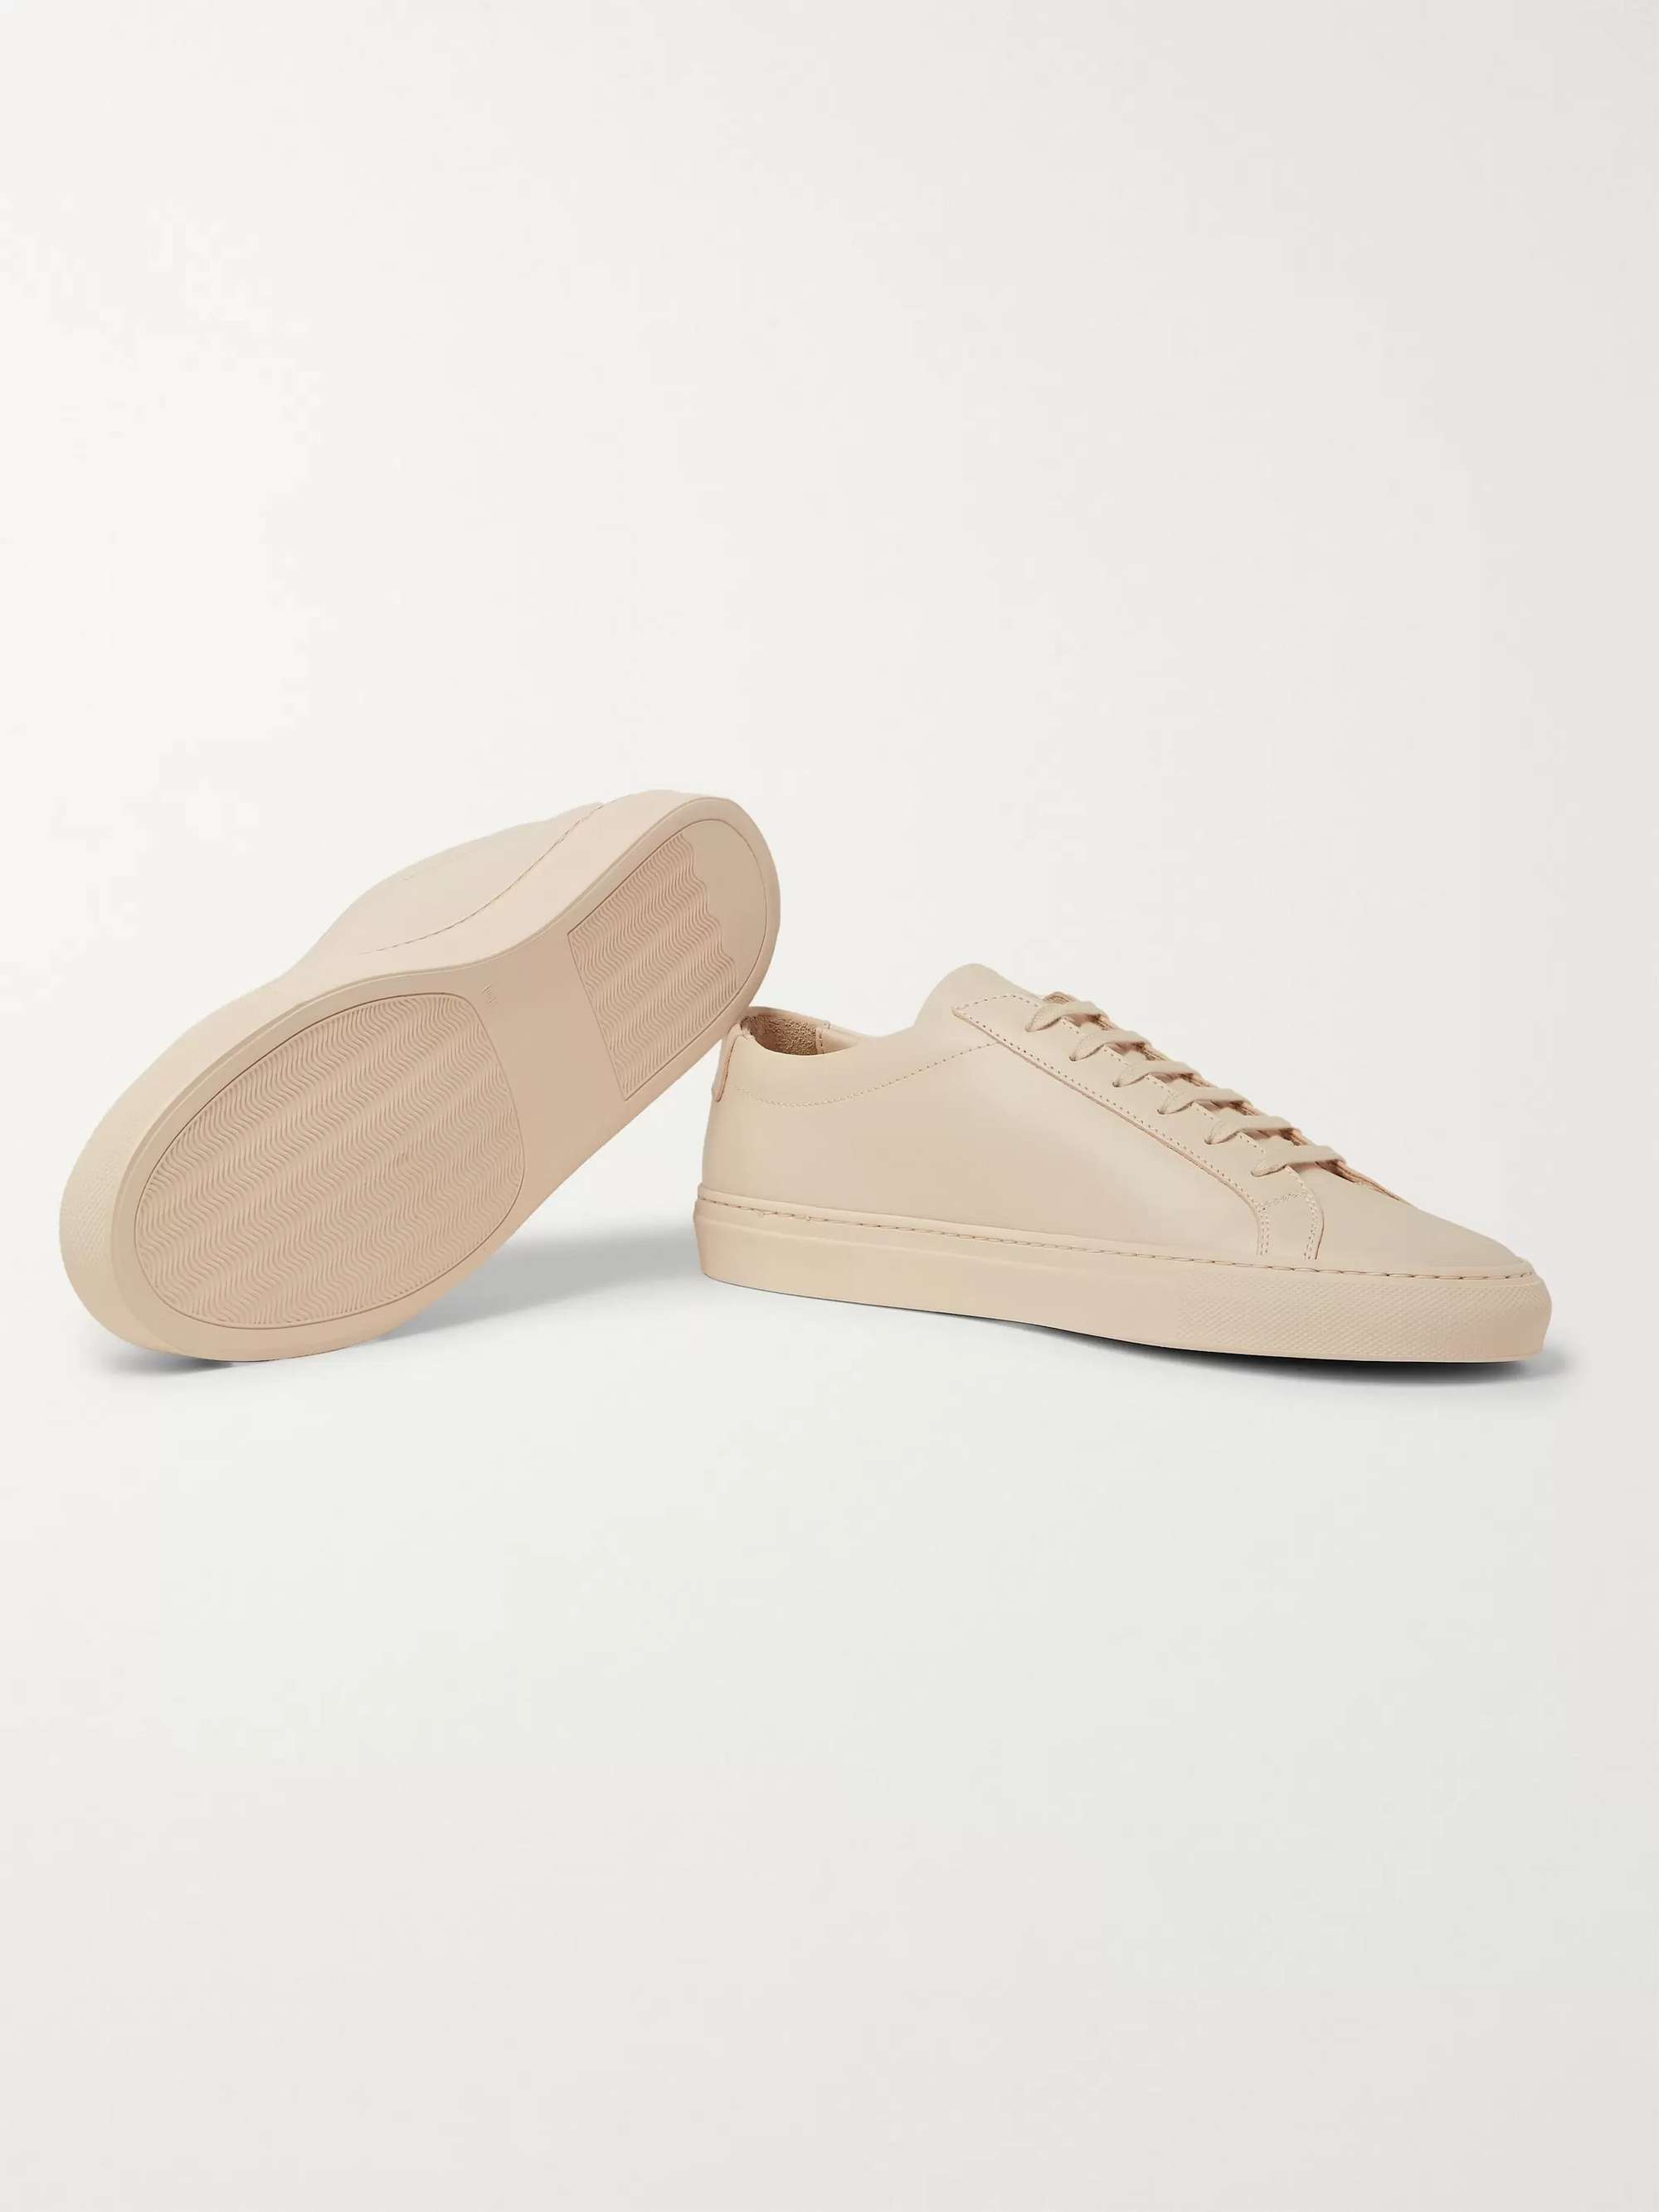 COMMON PROJECTS Original Achilles Leather Sneakers